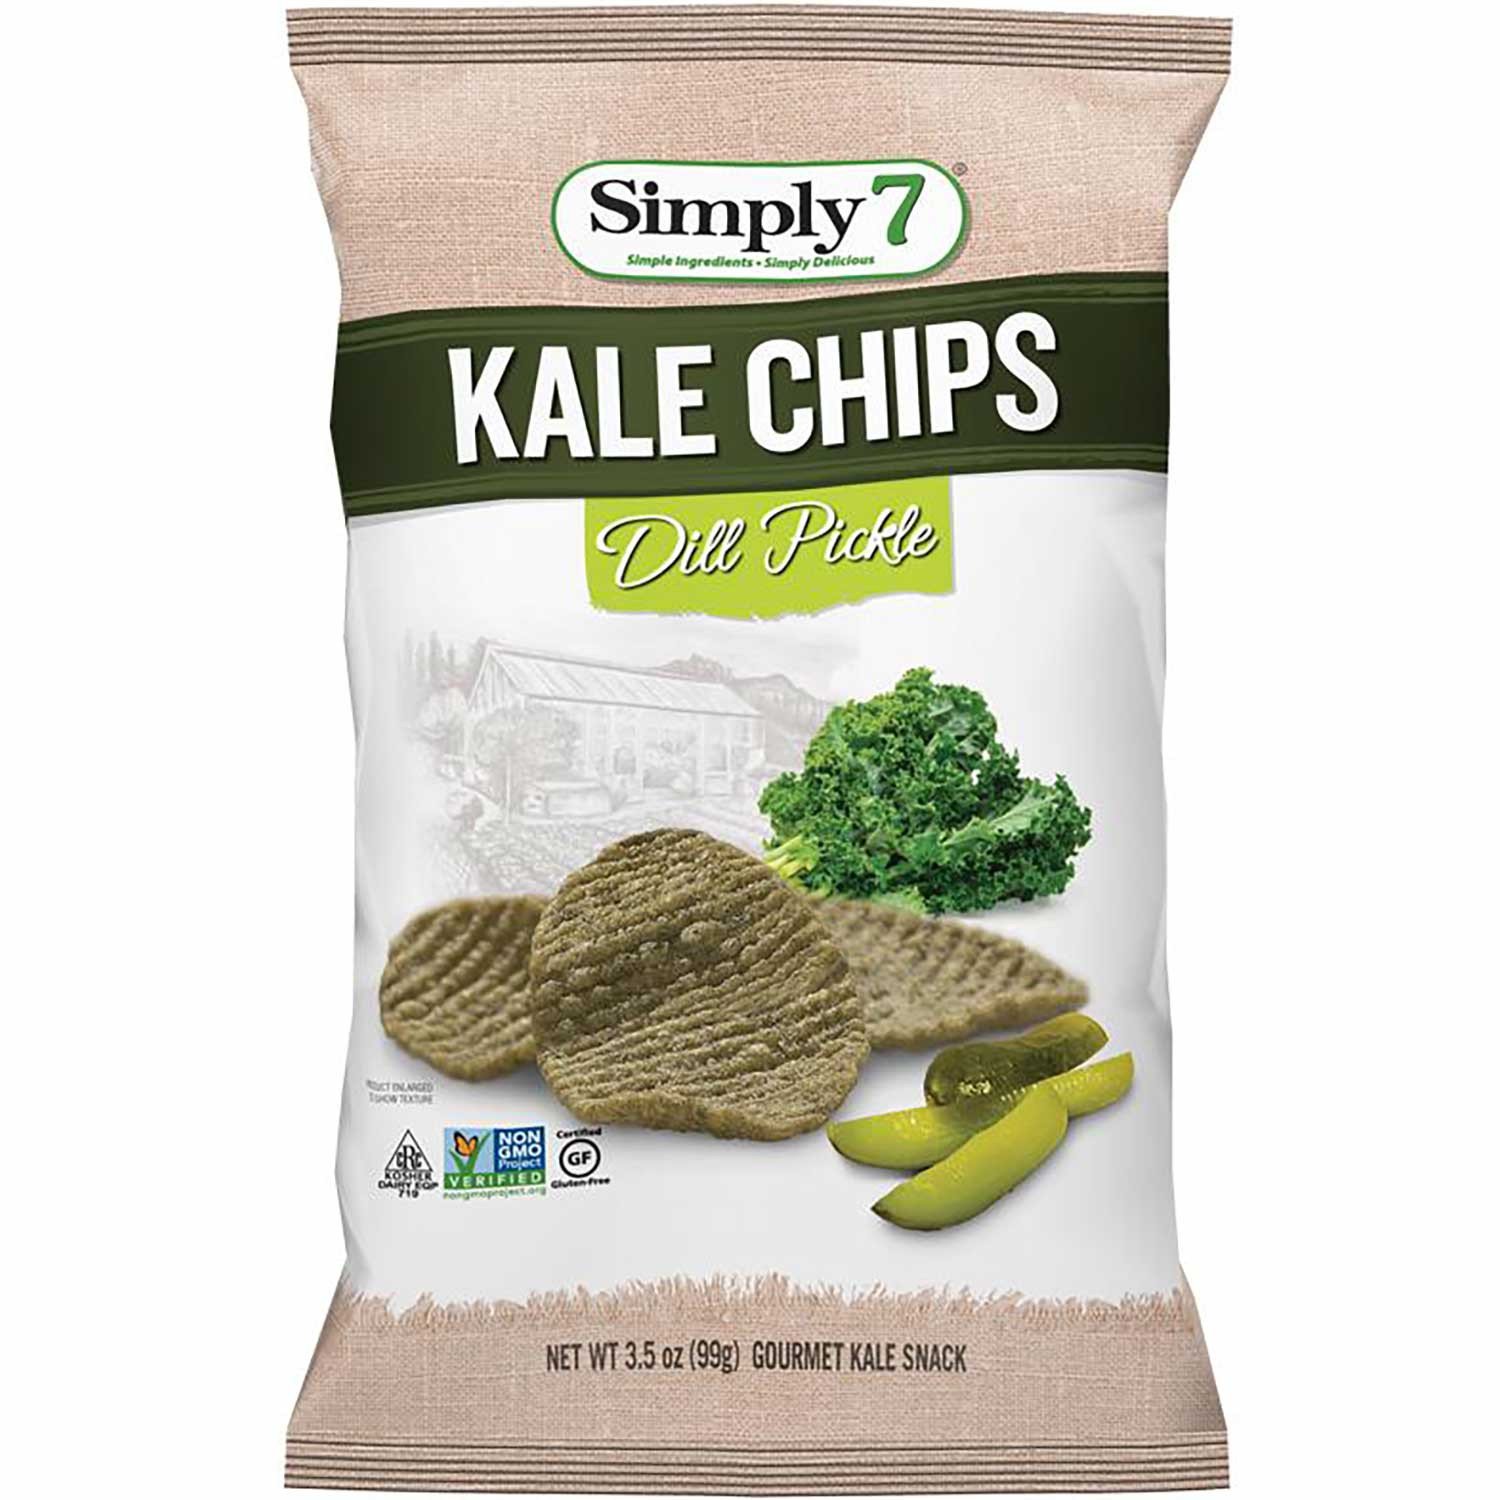 Simply 7 Kale Chips - Dill Pickle 99g